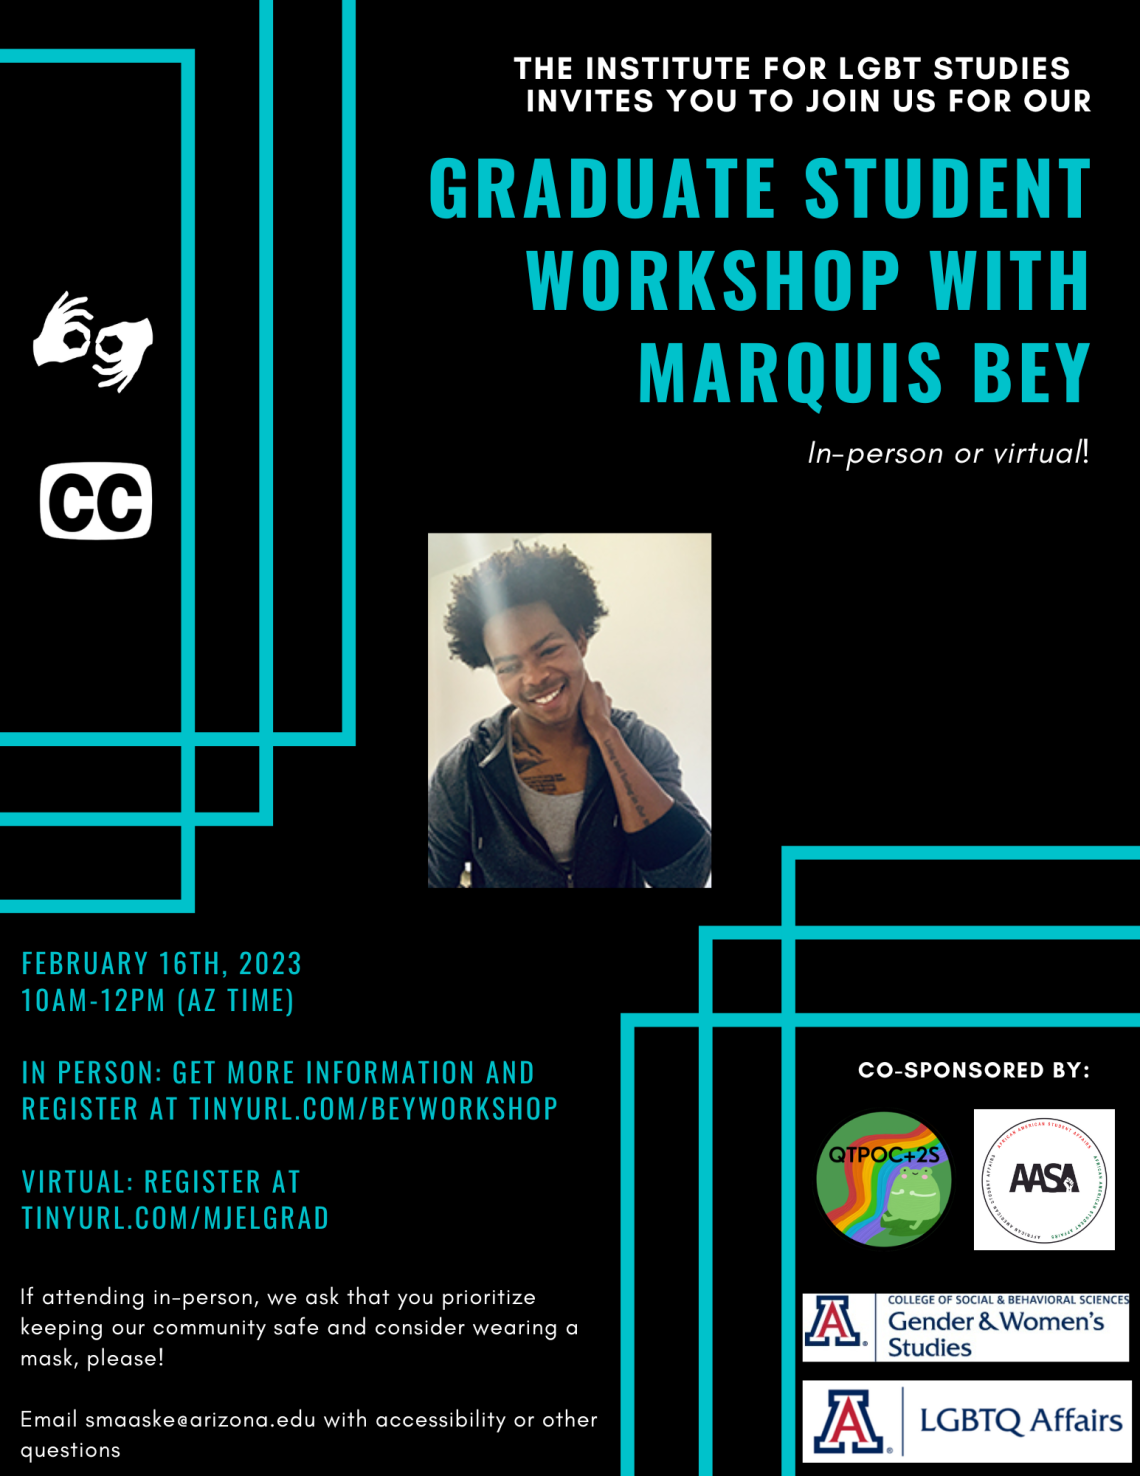 Black background with bright blue overlaying rectangle outlines on the corners. White and bright blue text reads: “The Institute for LGBT Studies invites you to join us for our Graduate Student Workshop with Marquis Bey: In-person or virtual! February 16th, 2023. 10am-12pm (AZ Time). In person: get more information and register at tinyurl.com/beyworkshop Virtual: register at tinyurl.com/MJELGrad 